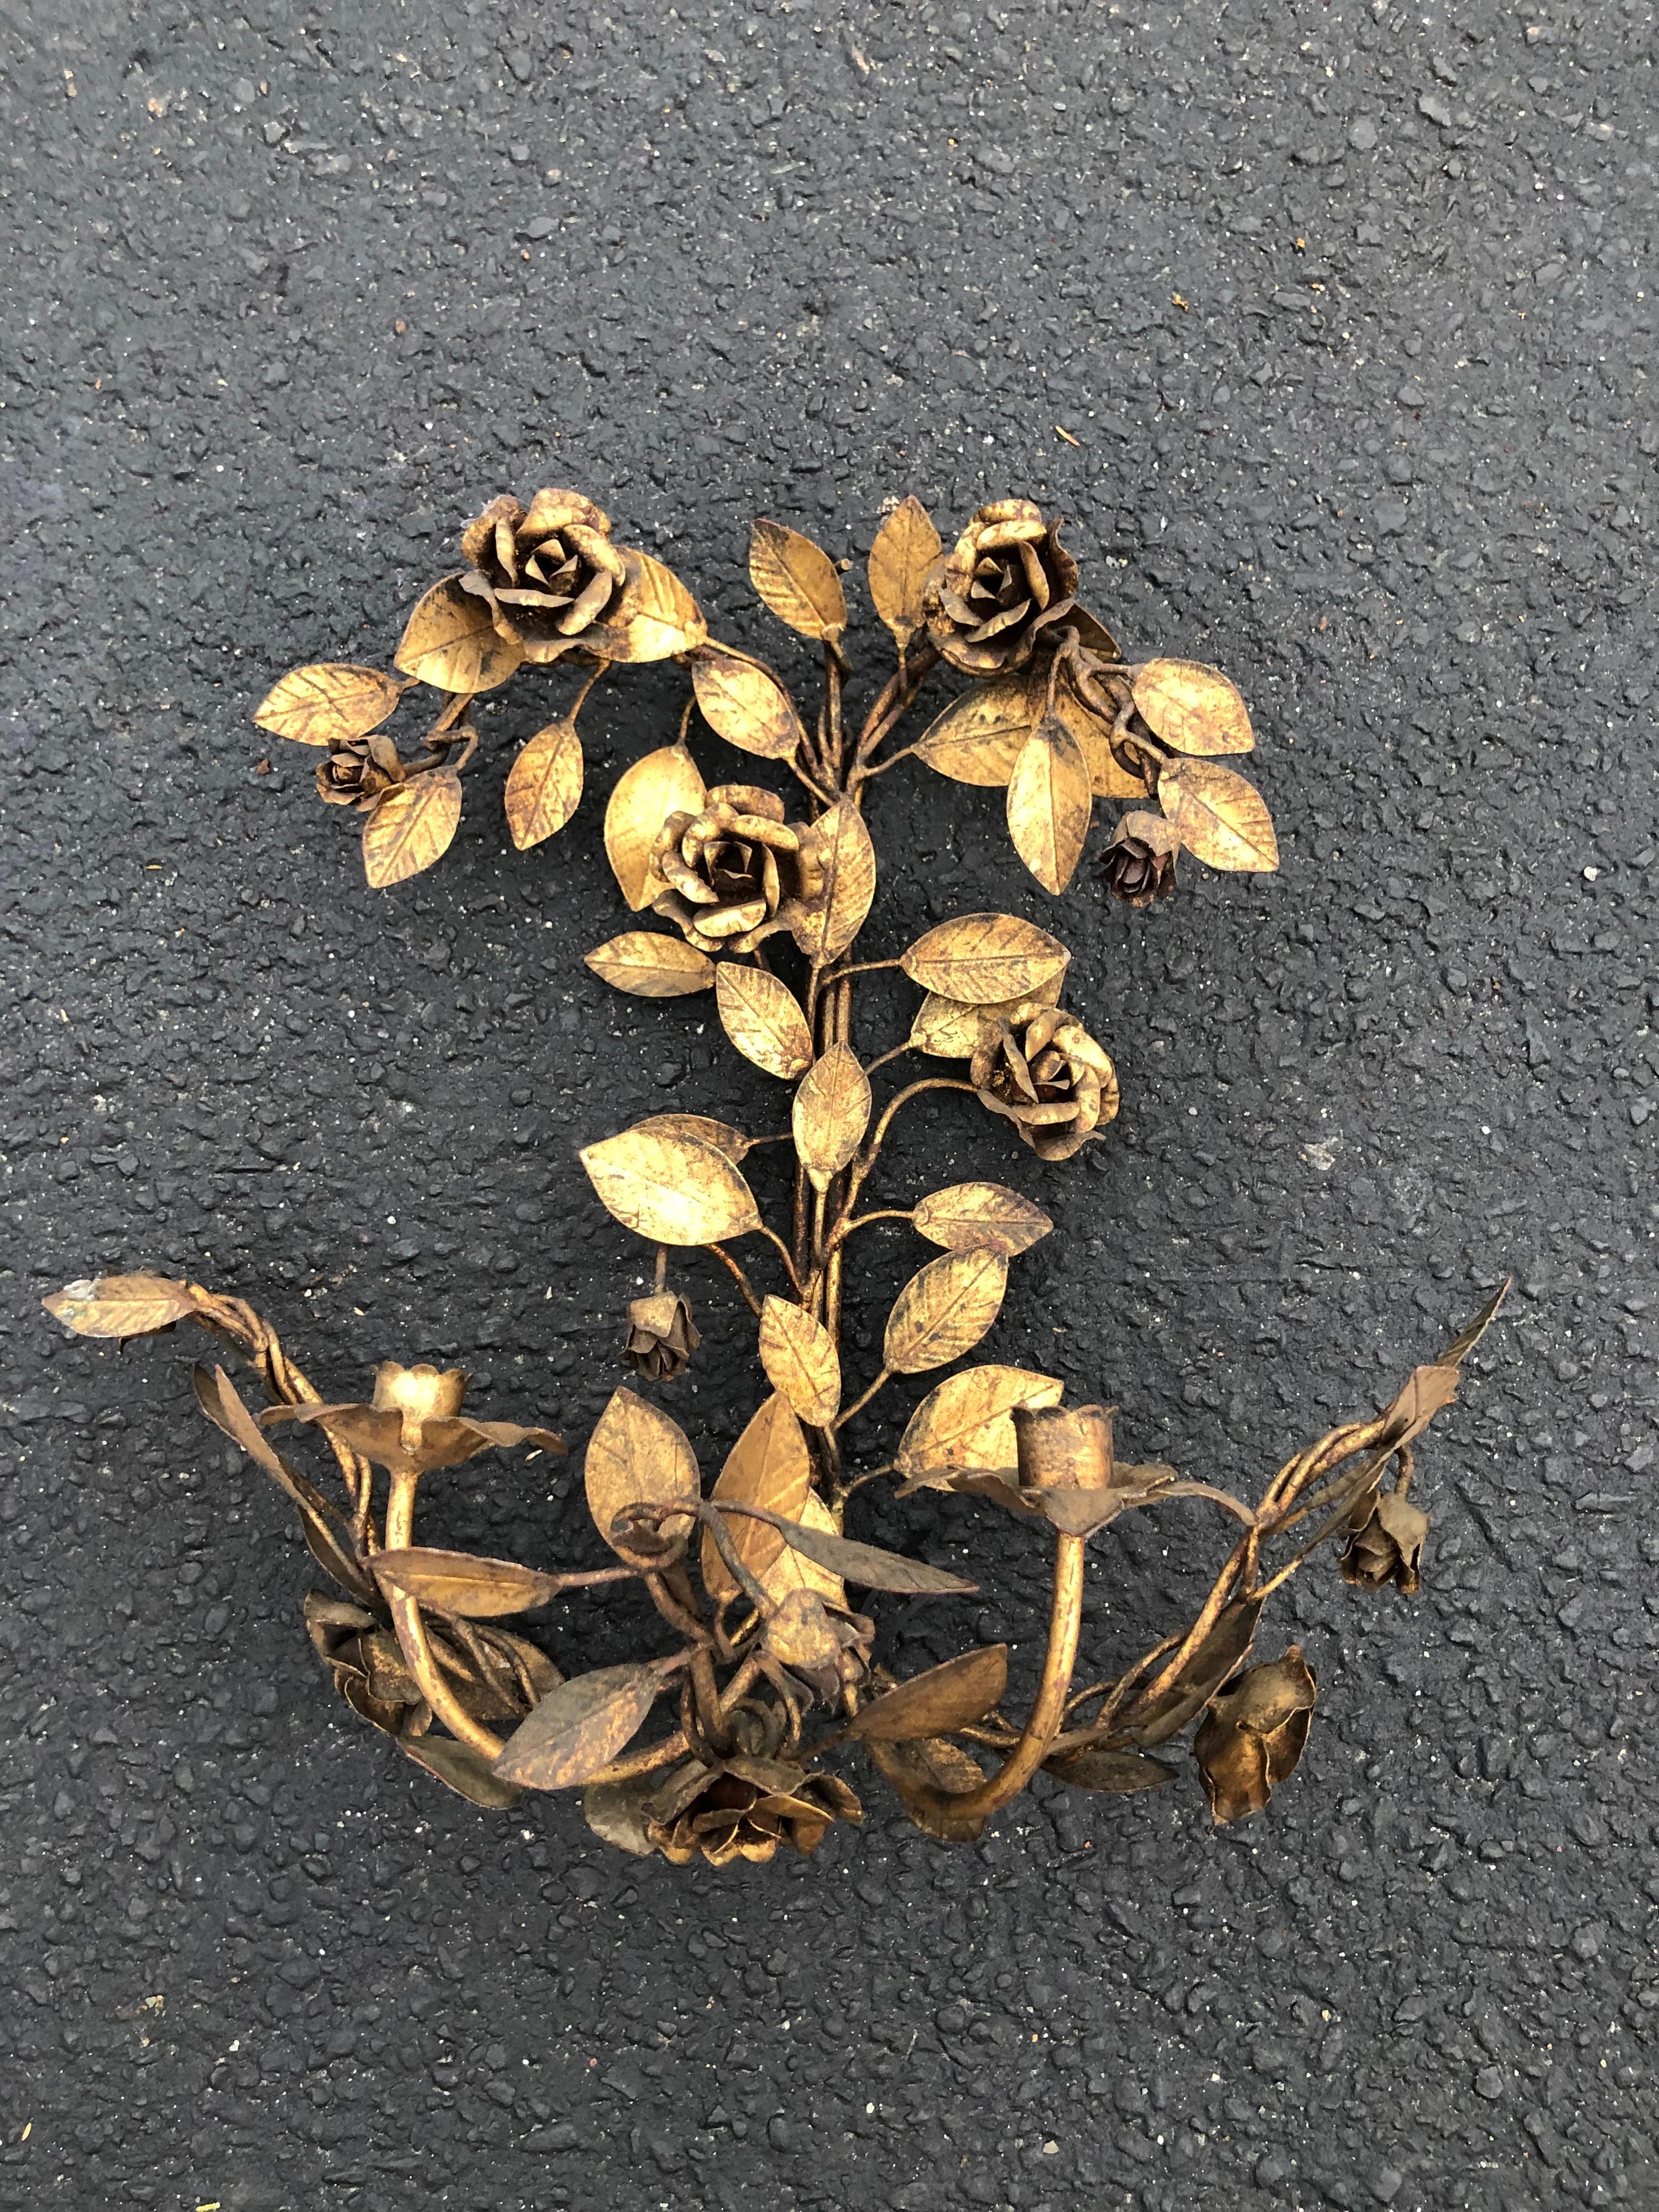 Italian gilt metal floral wall sconce. Elaborate rose and leaf pattern with two candle holders. Romantic Hollywood Regency decor for that dramatic statement. Most likely made in Italy.